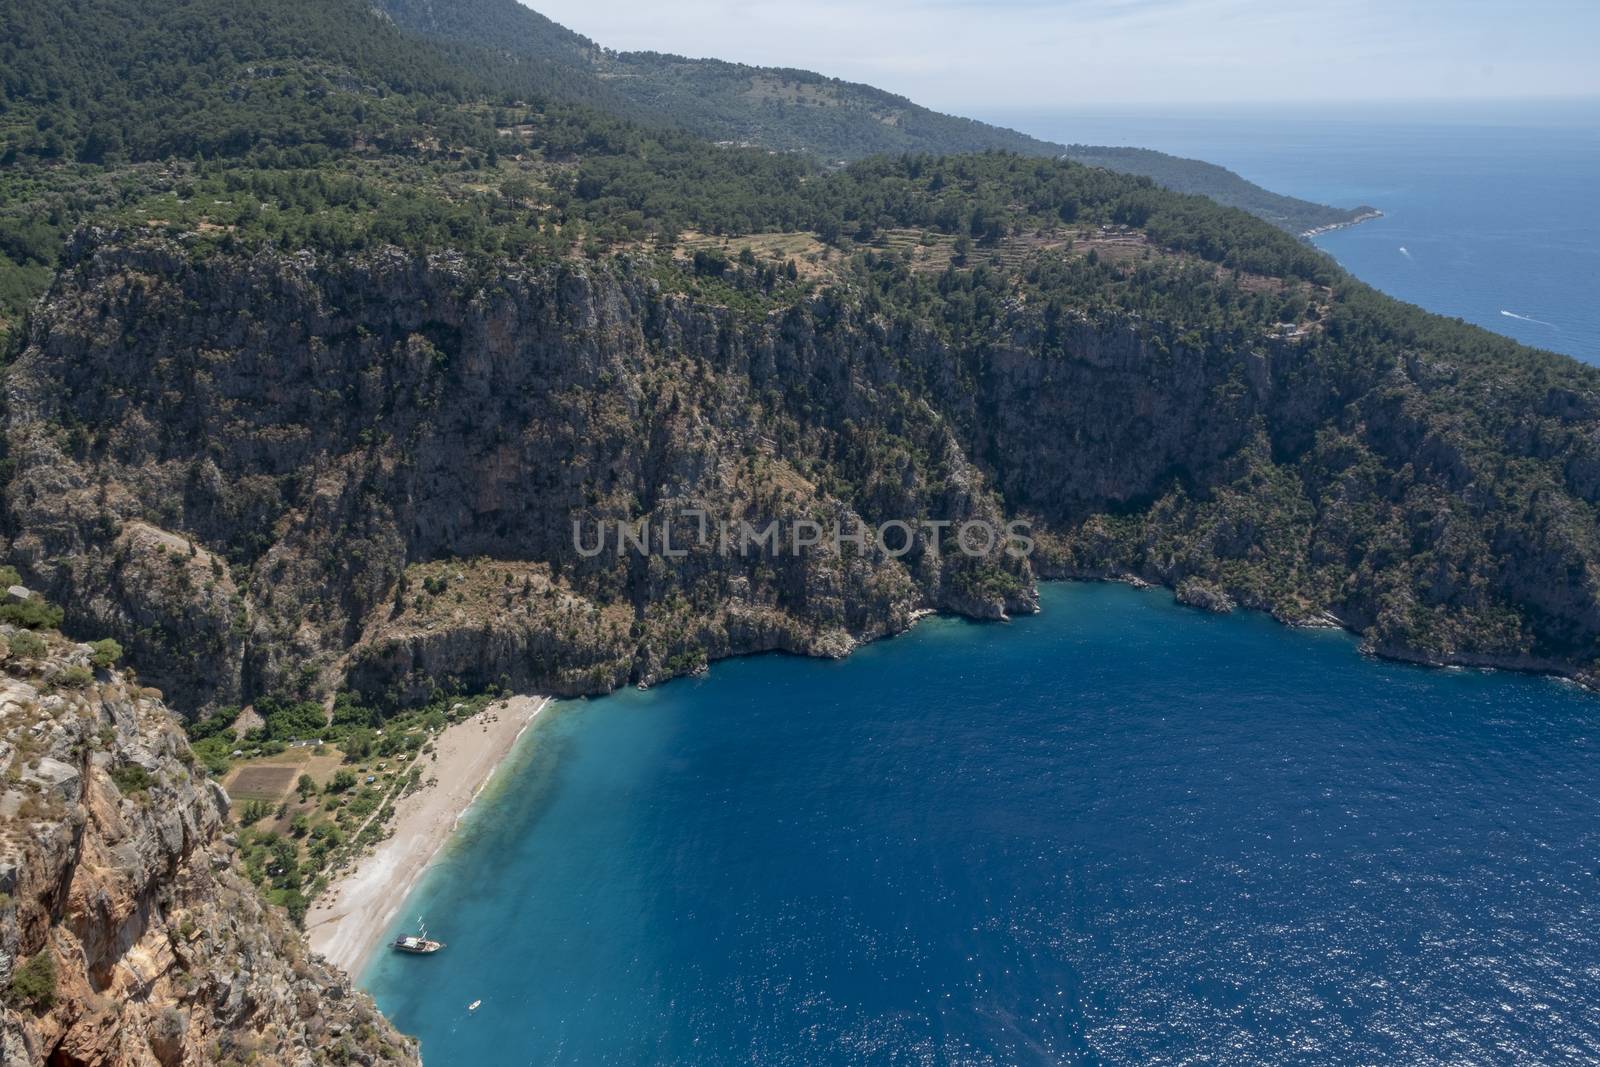 Kelebekler vadisi. Forest and beautiful sea in Mediterranean. butterfly Valley by oaltindag